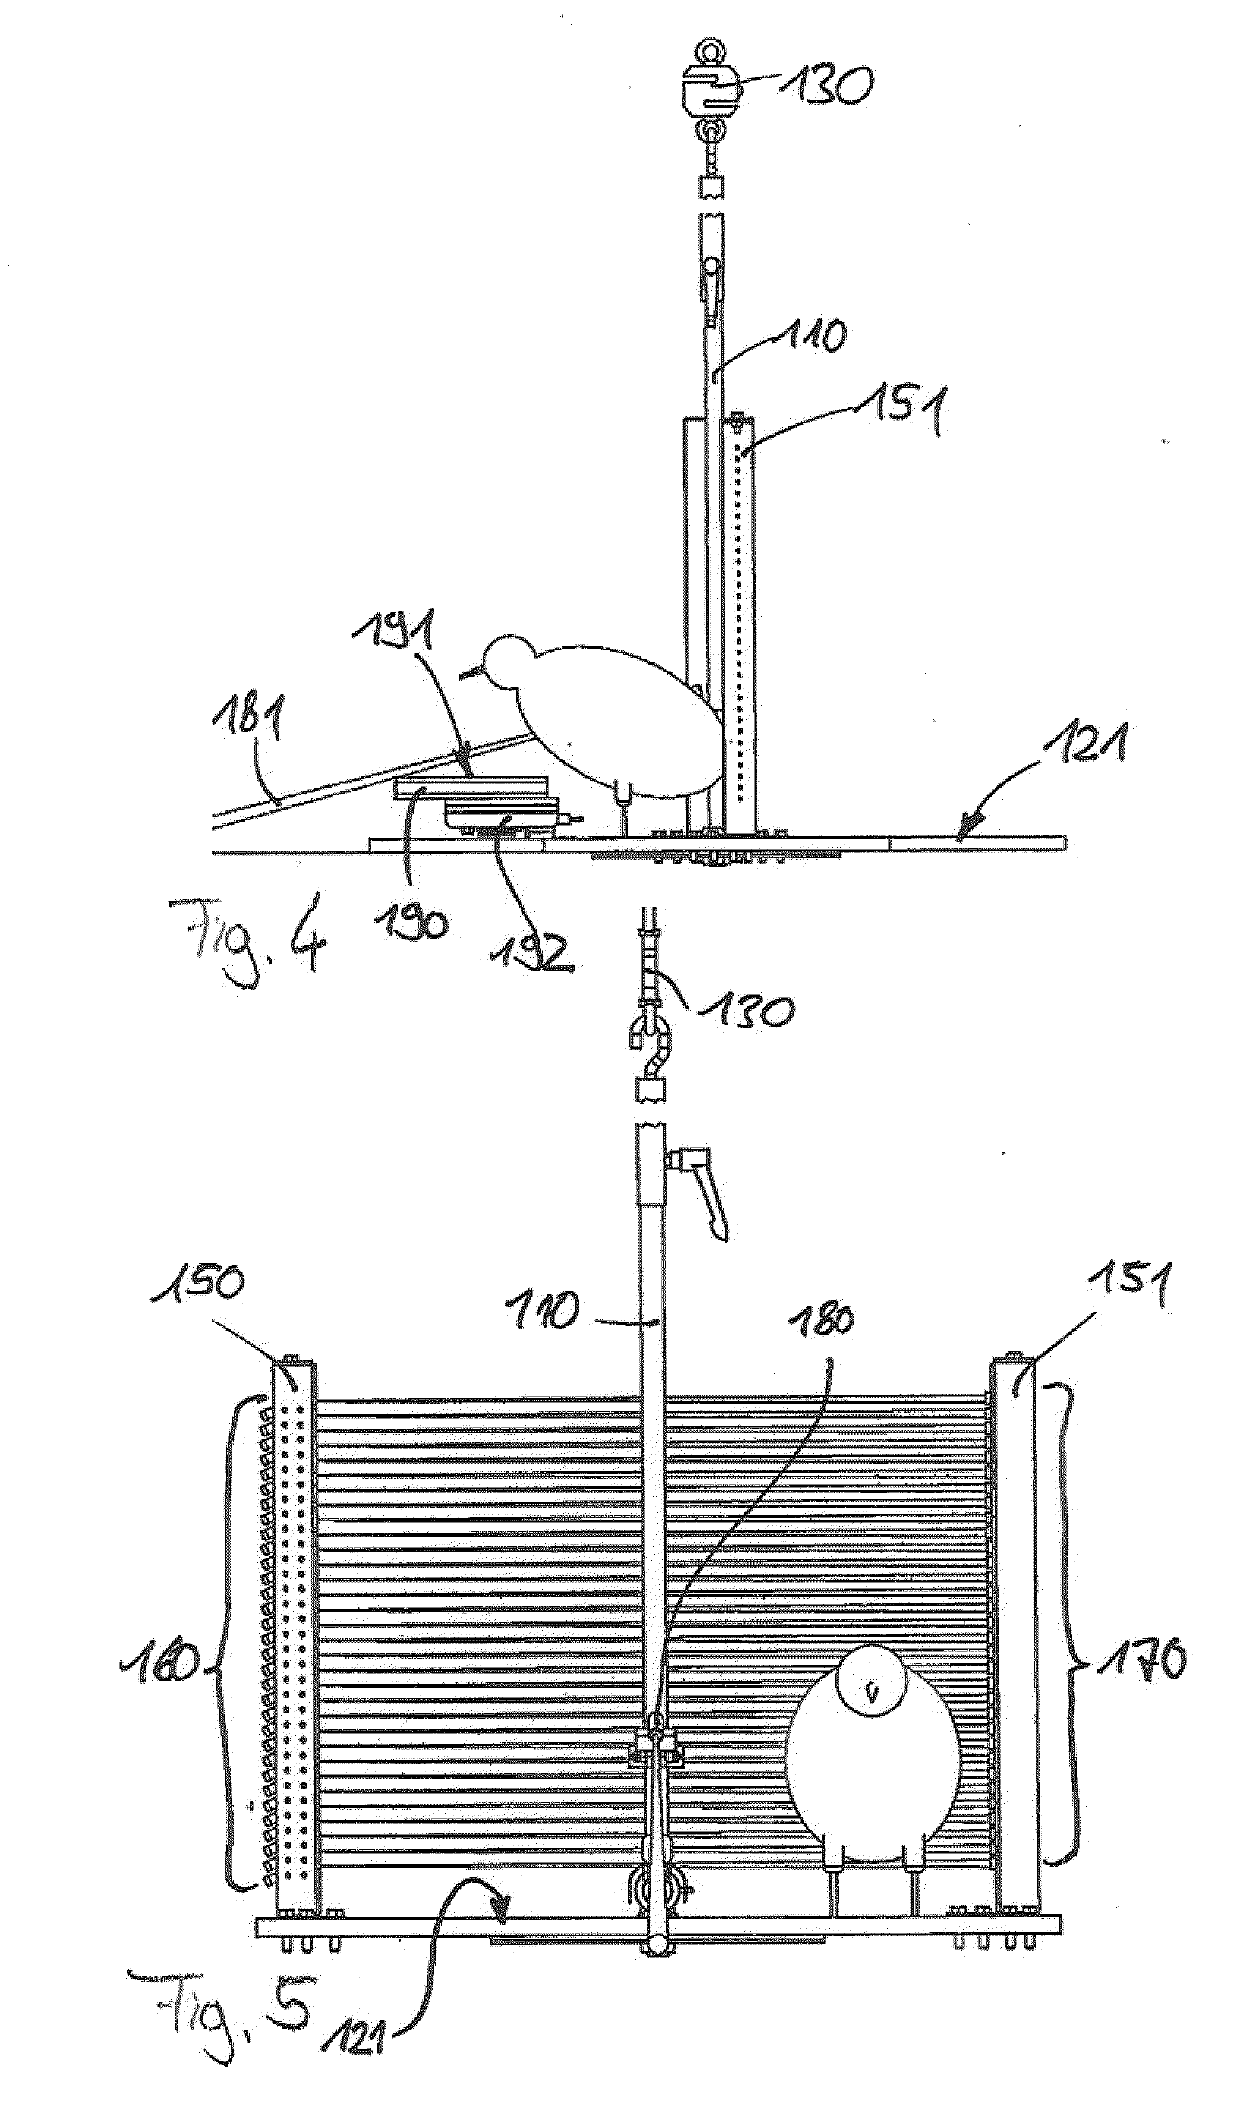 Poultry weighing apparatus